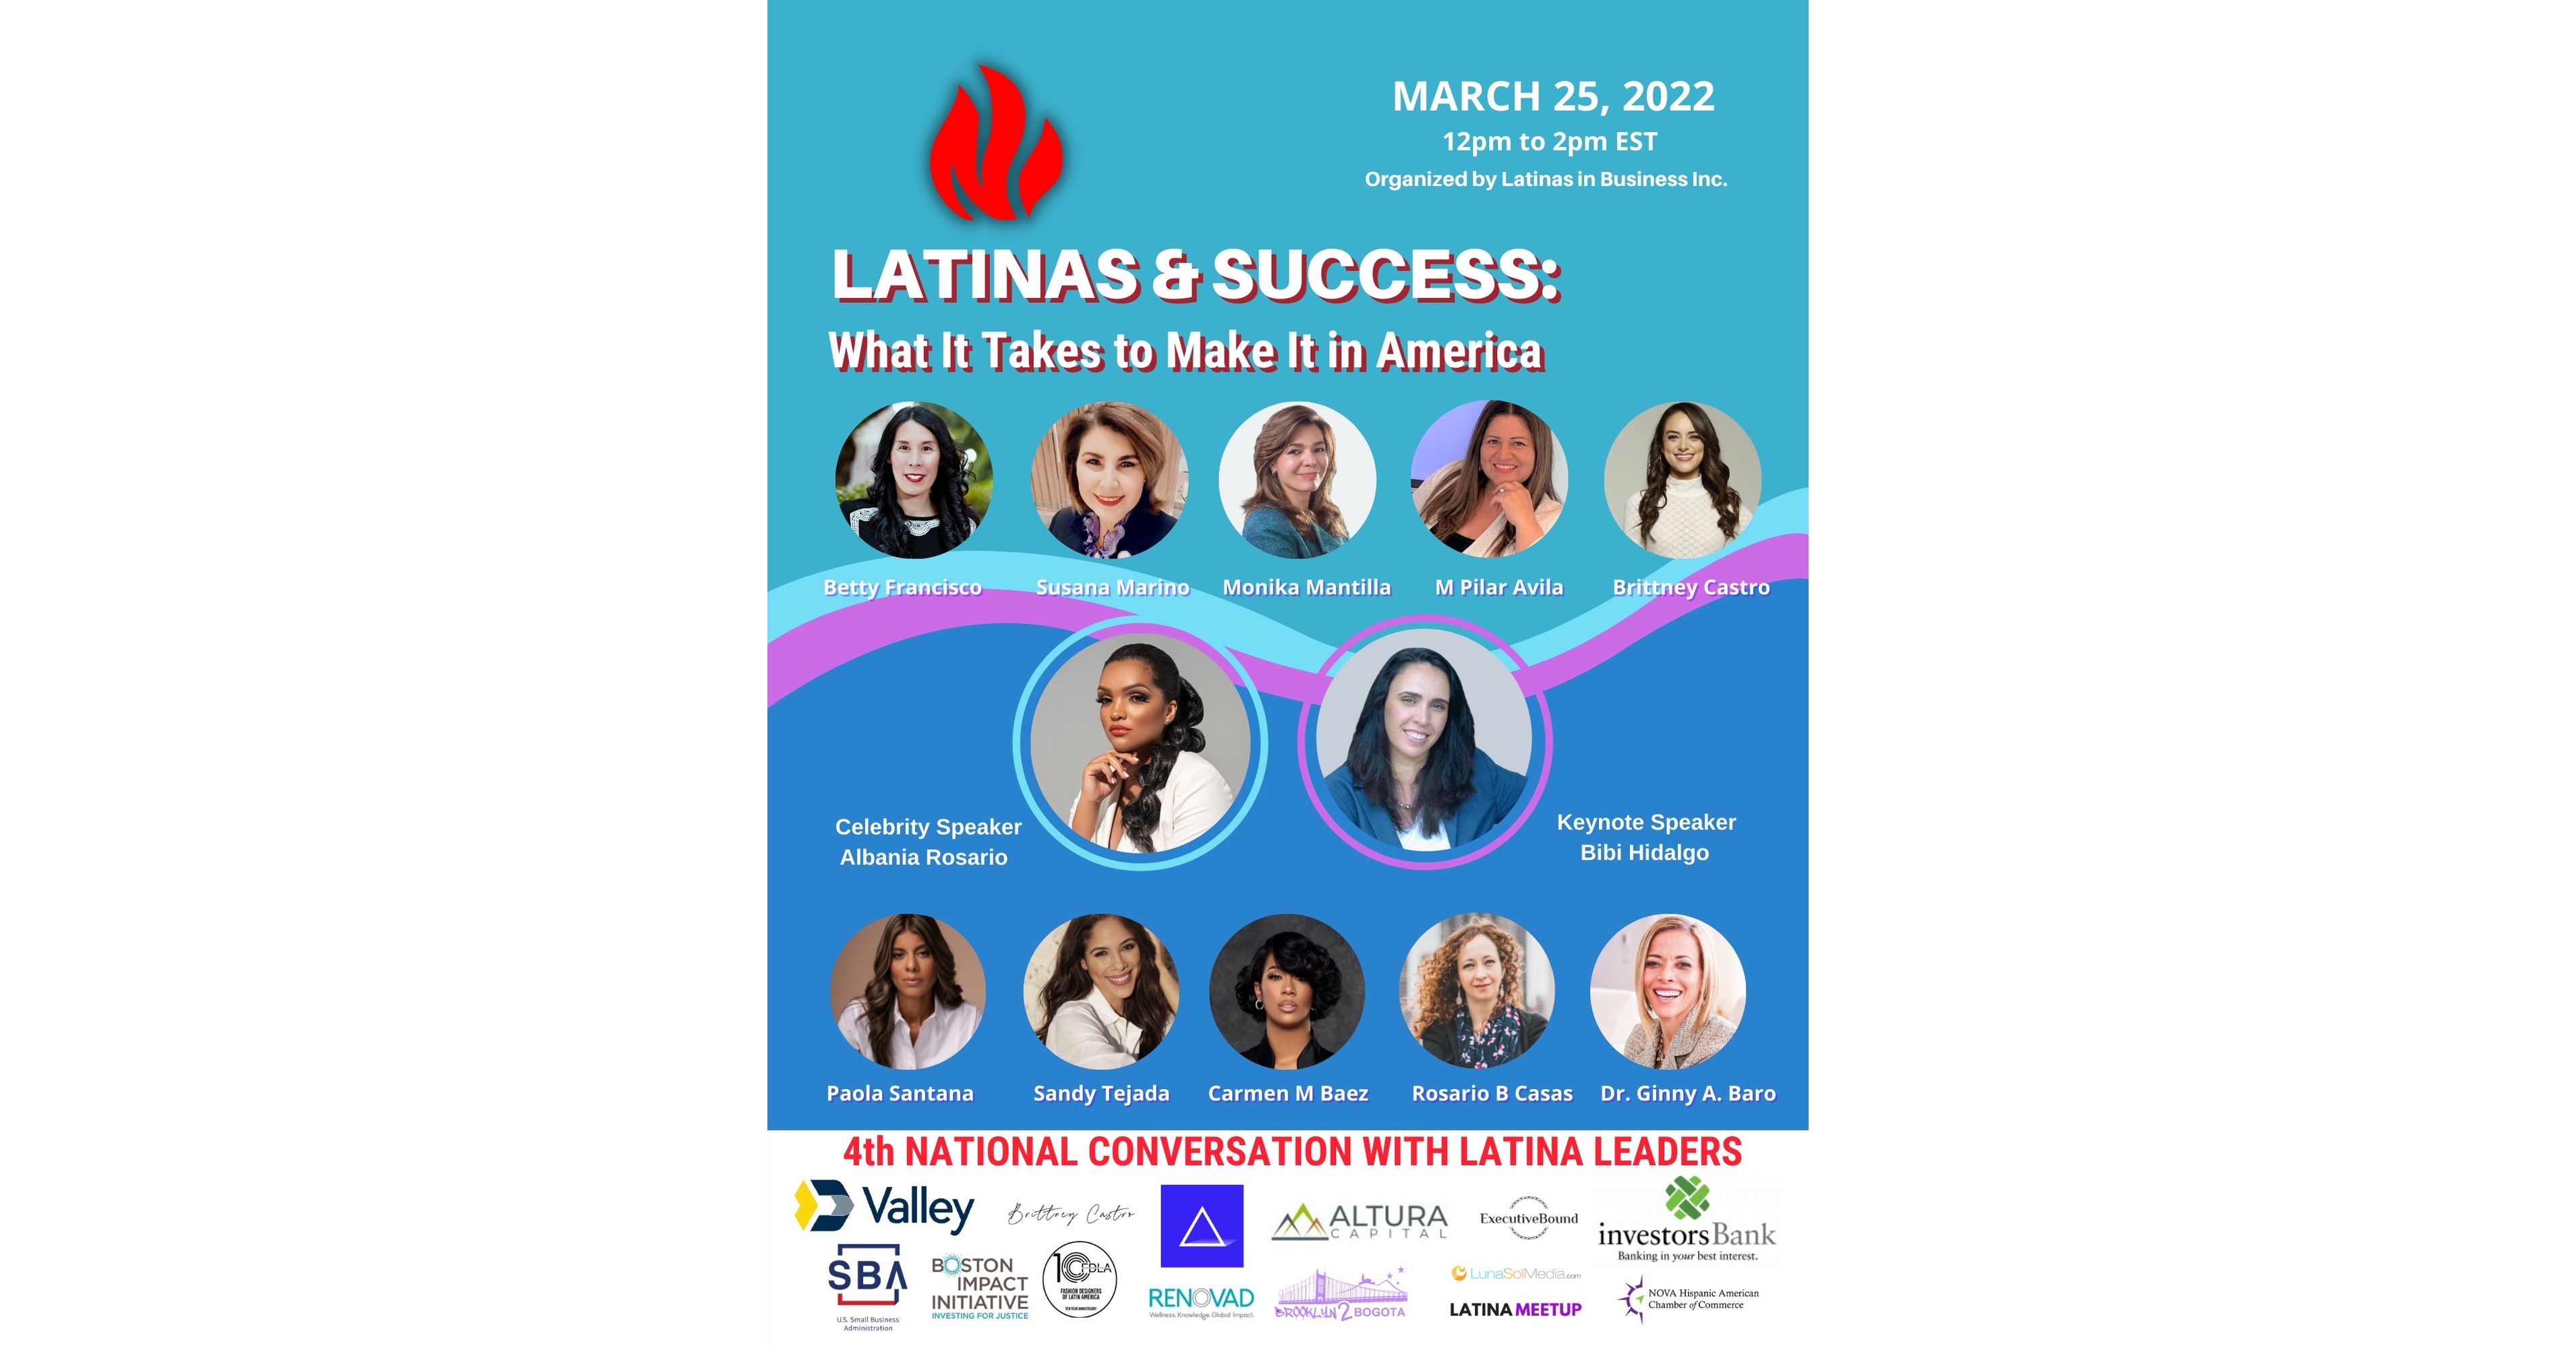 Full Speakers' Lineup for Latinas & Success at the 4th National